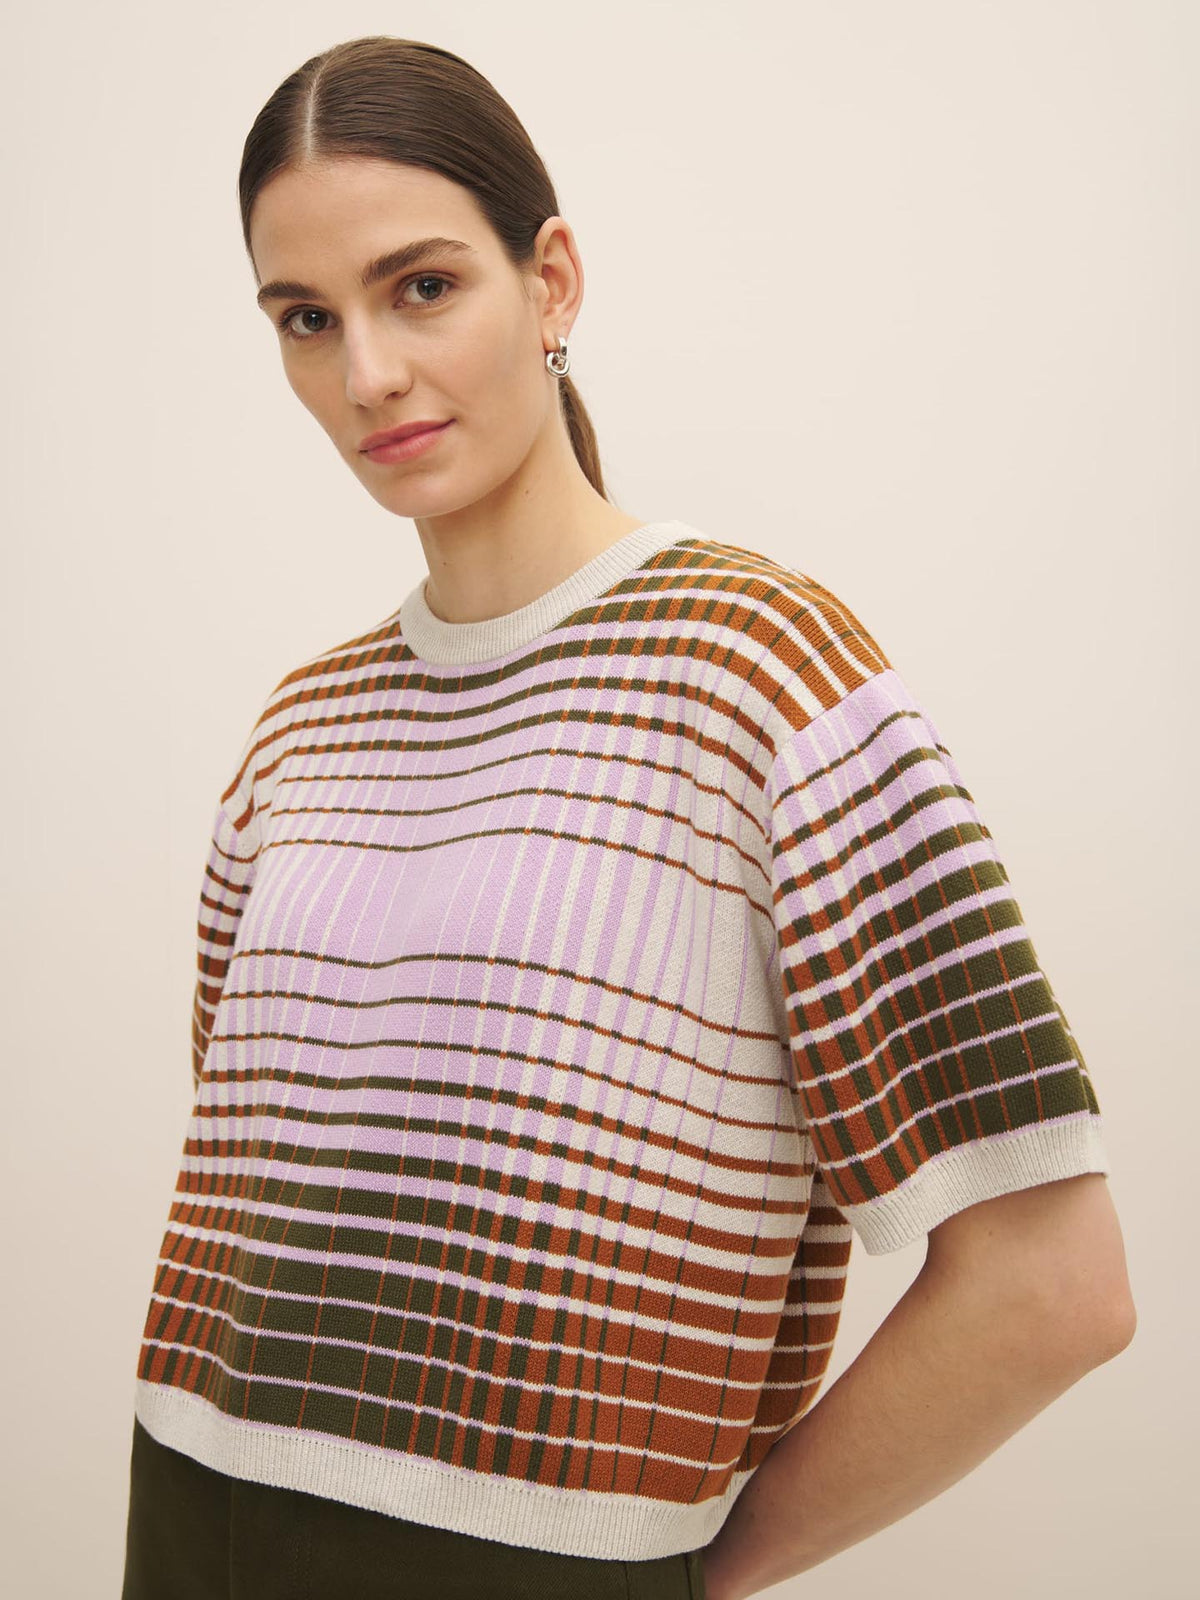 Woman in a Kowtow Gradient Knit Top looking at the camera.